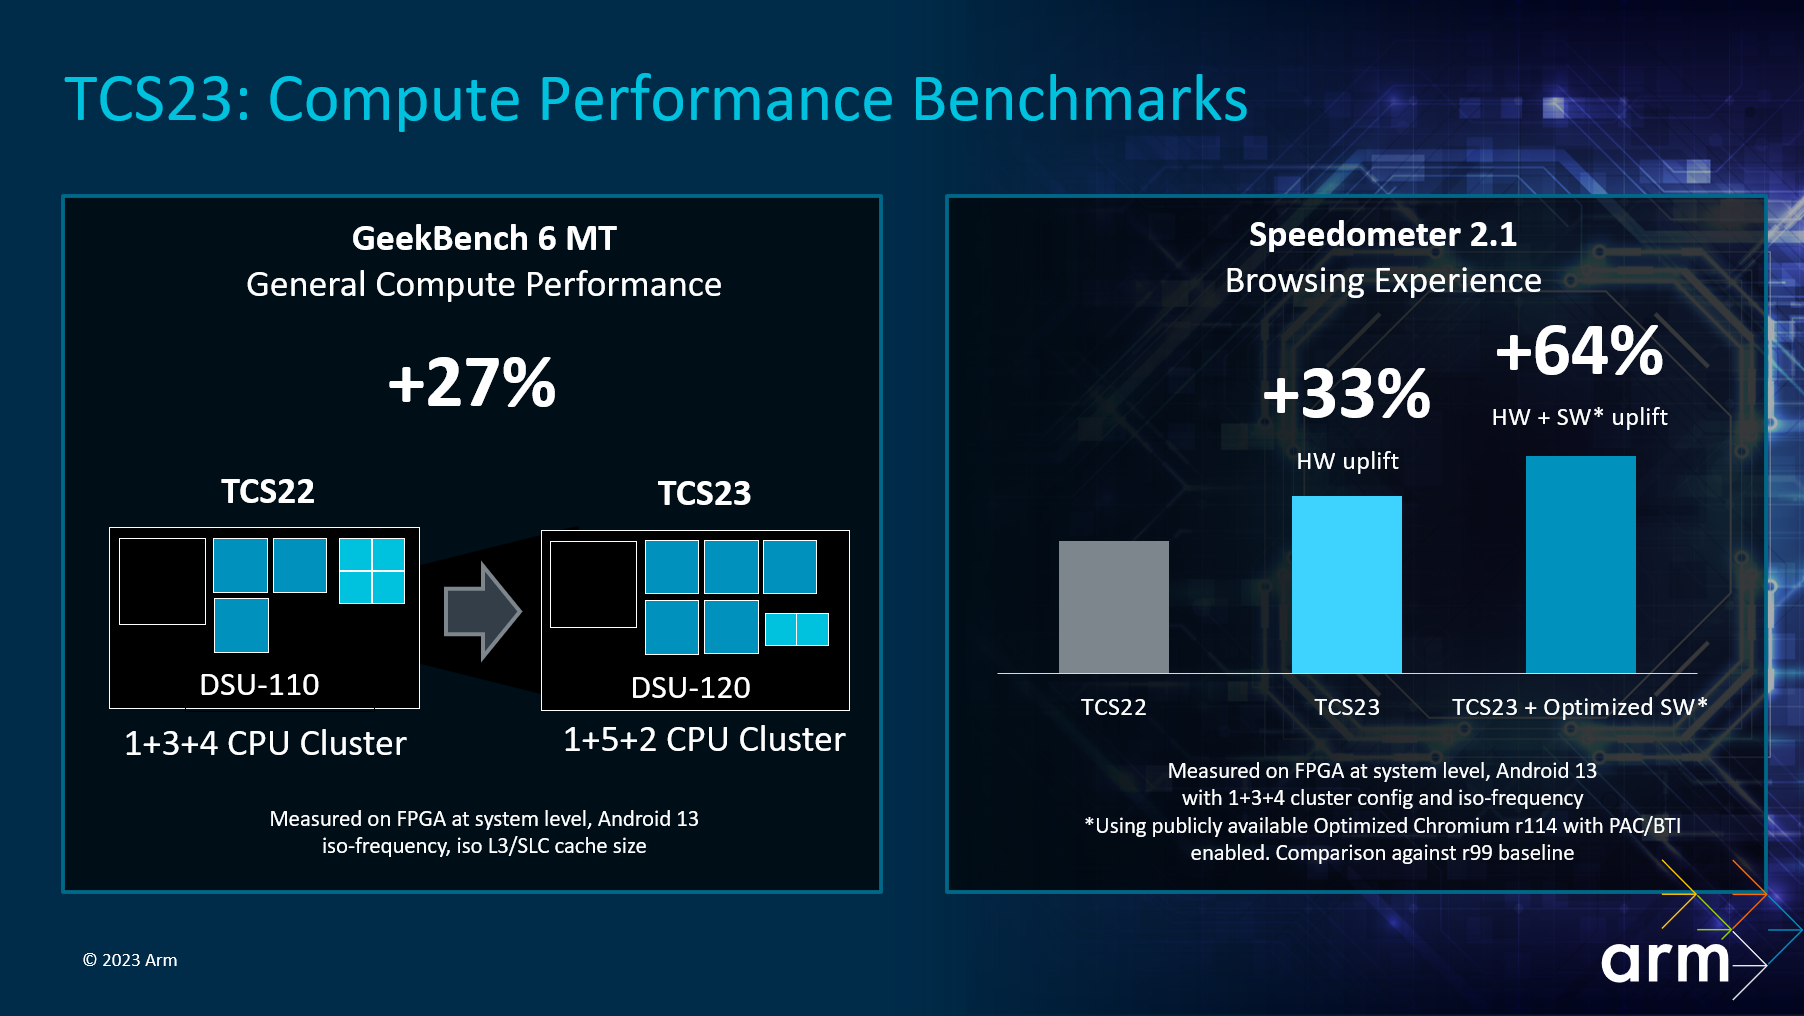 TCS23 compute performance benchmarks